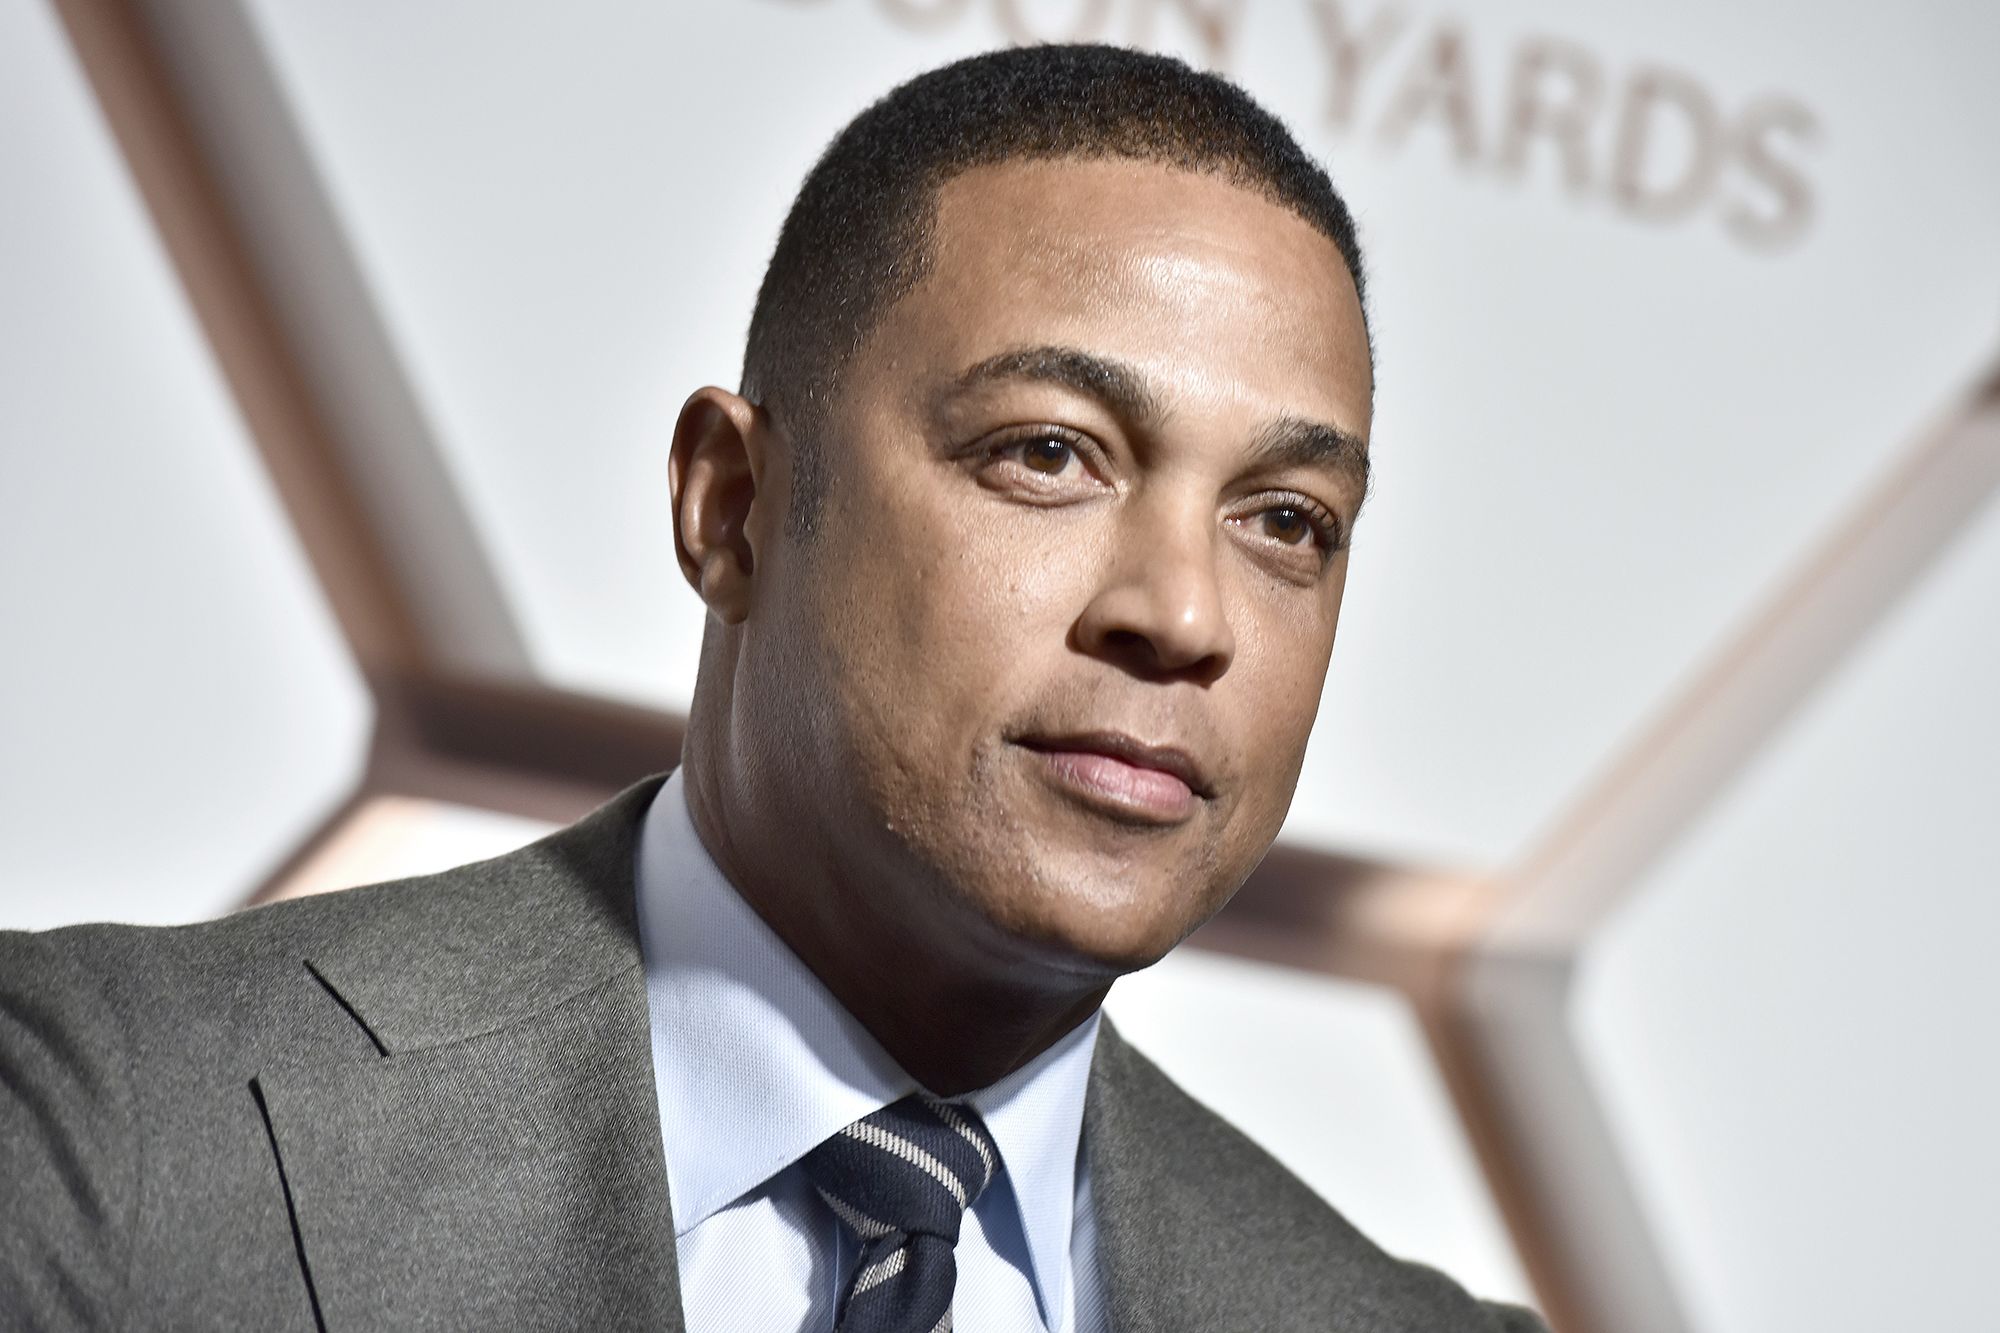 Don Lemon to return to CNN, will undergo formal training following sexist comments | CNN Business